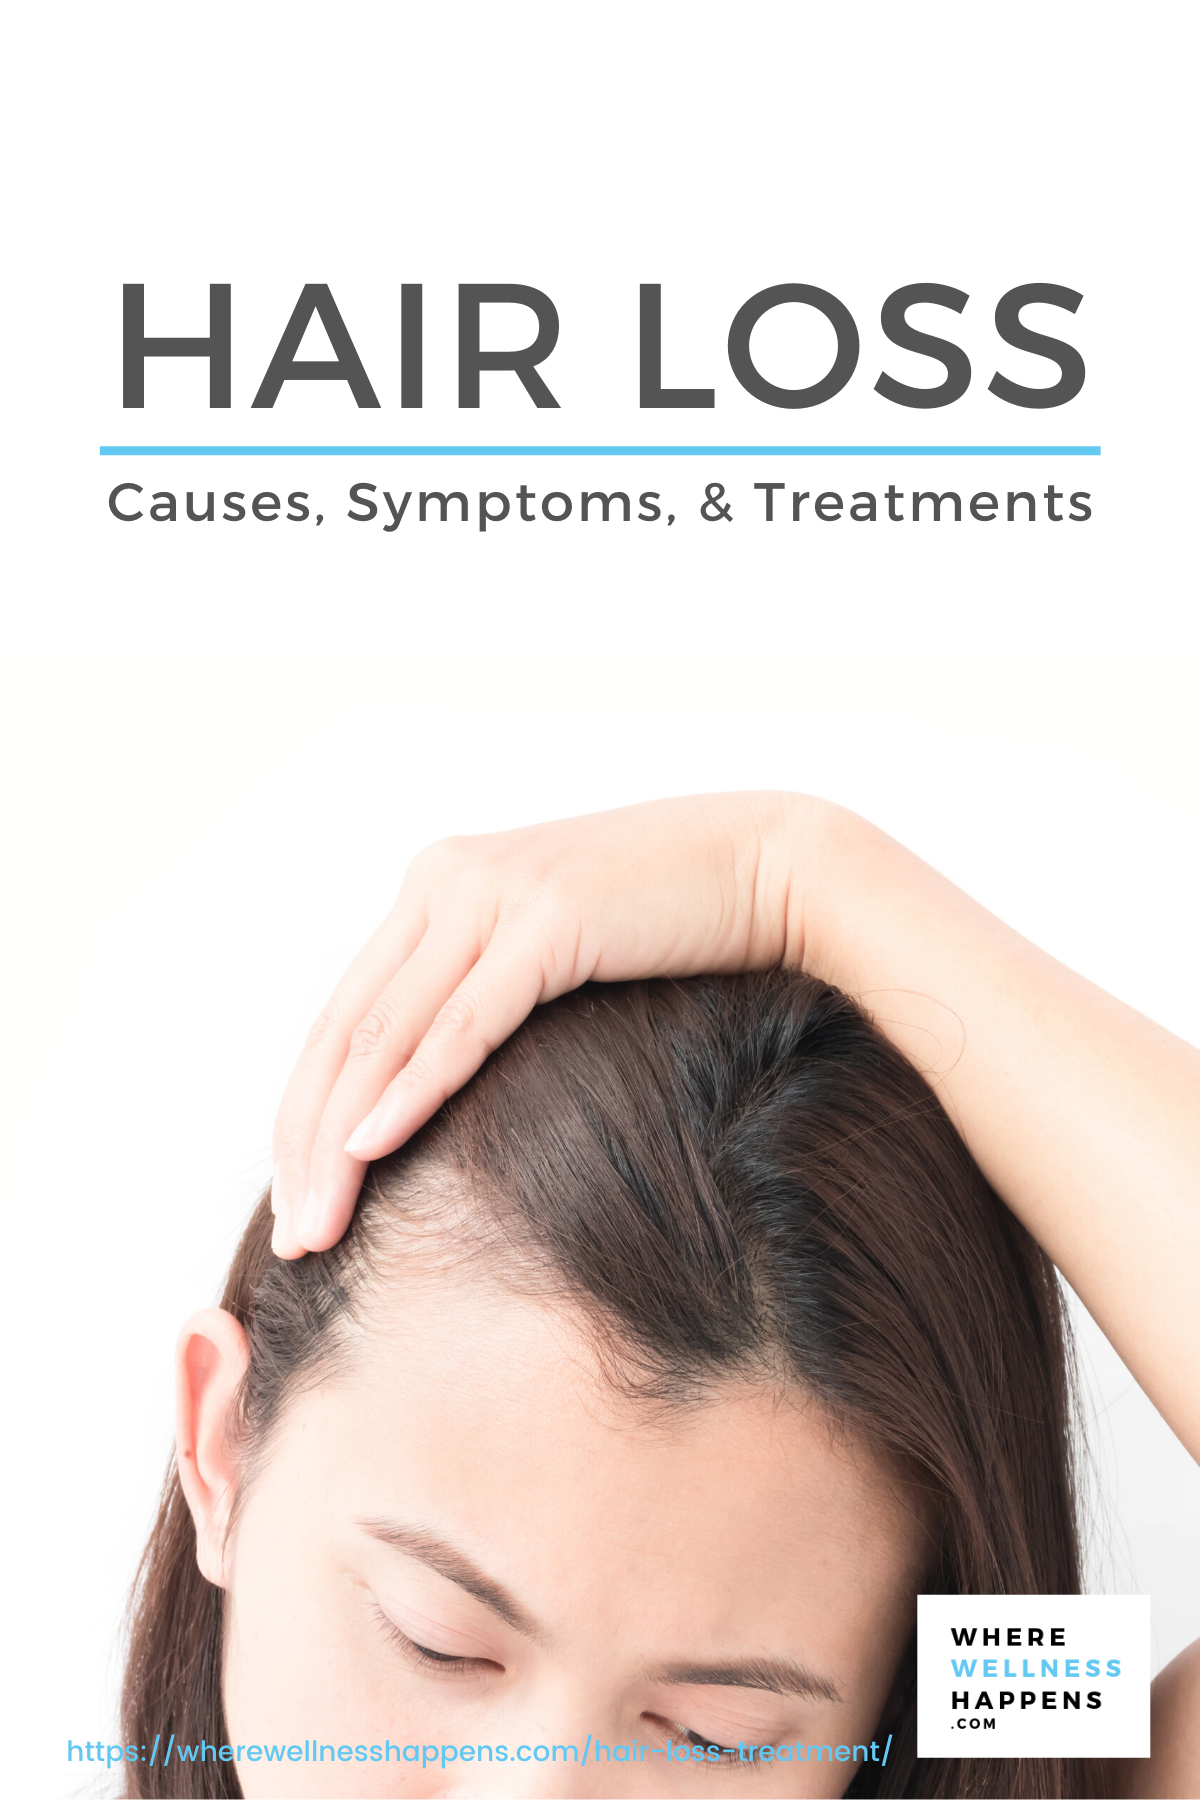 Hair Loss: Causes, Symptoms and Treatments